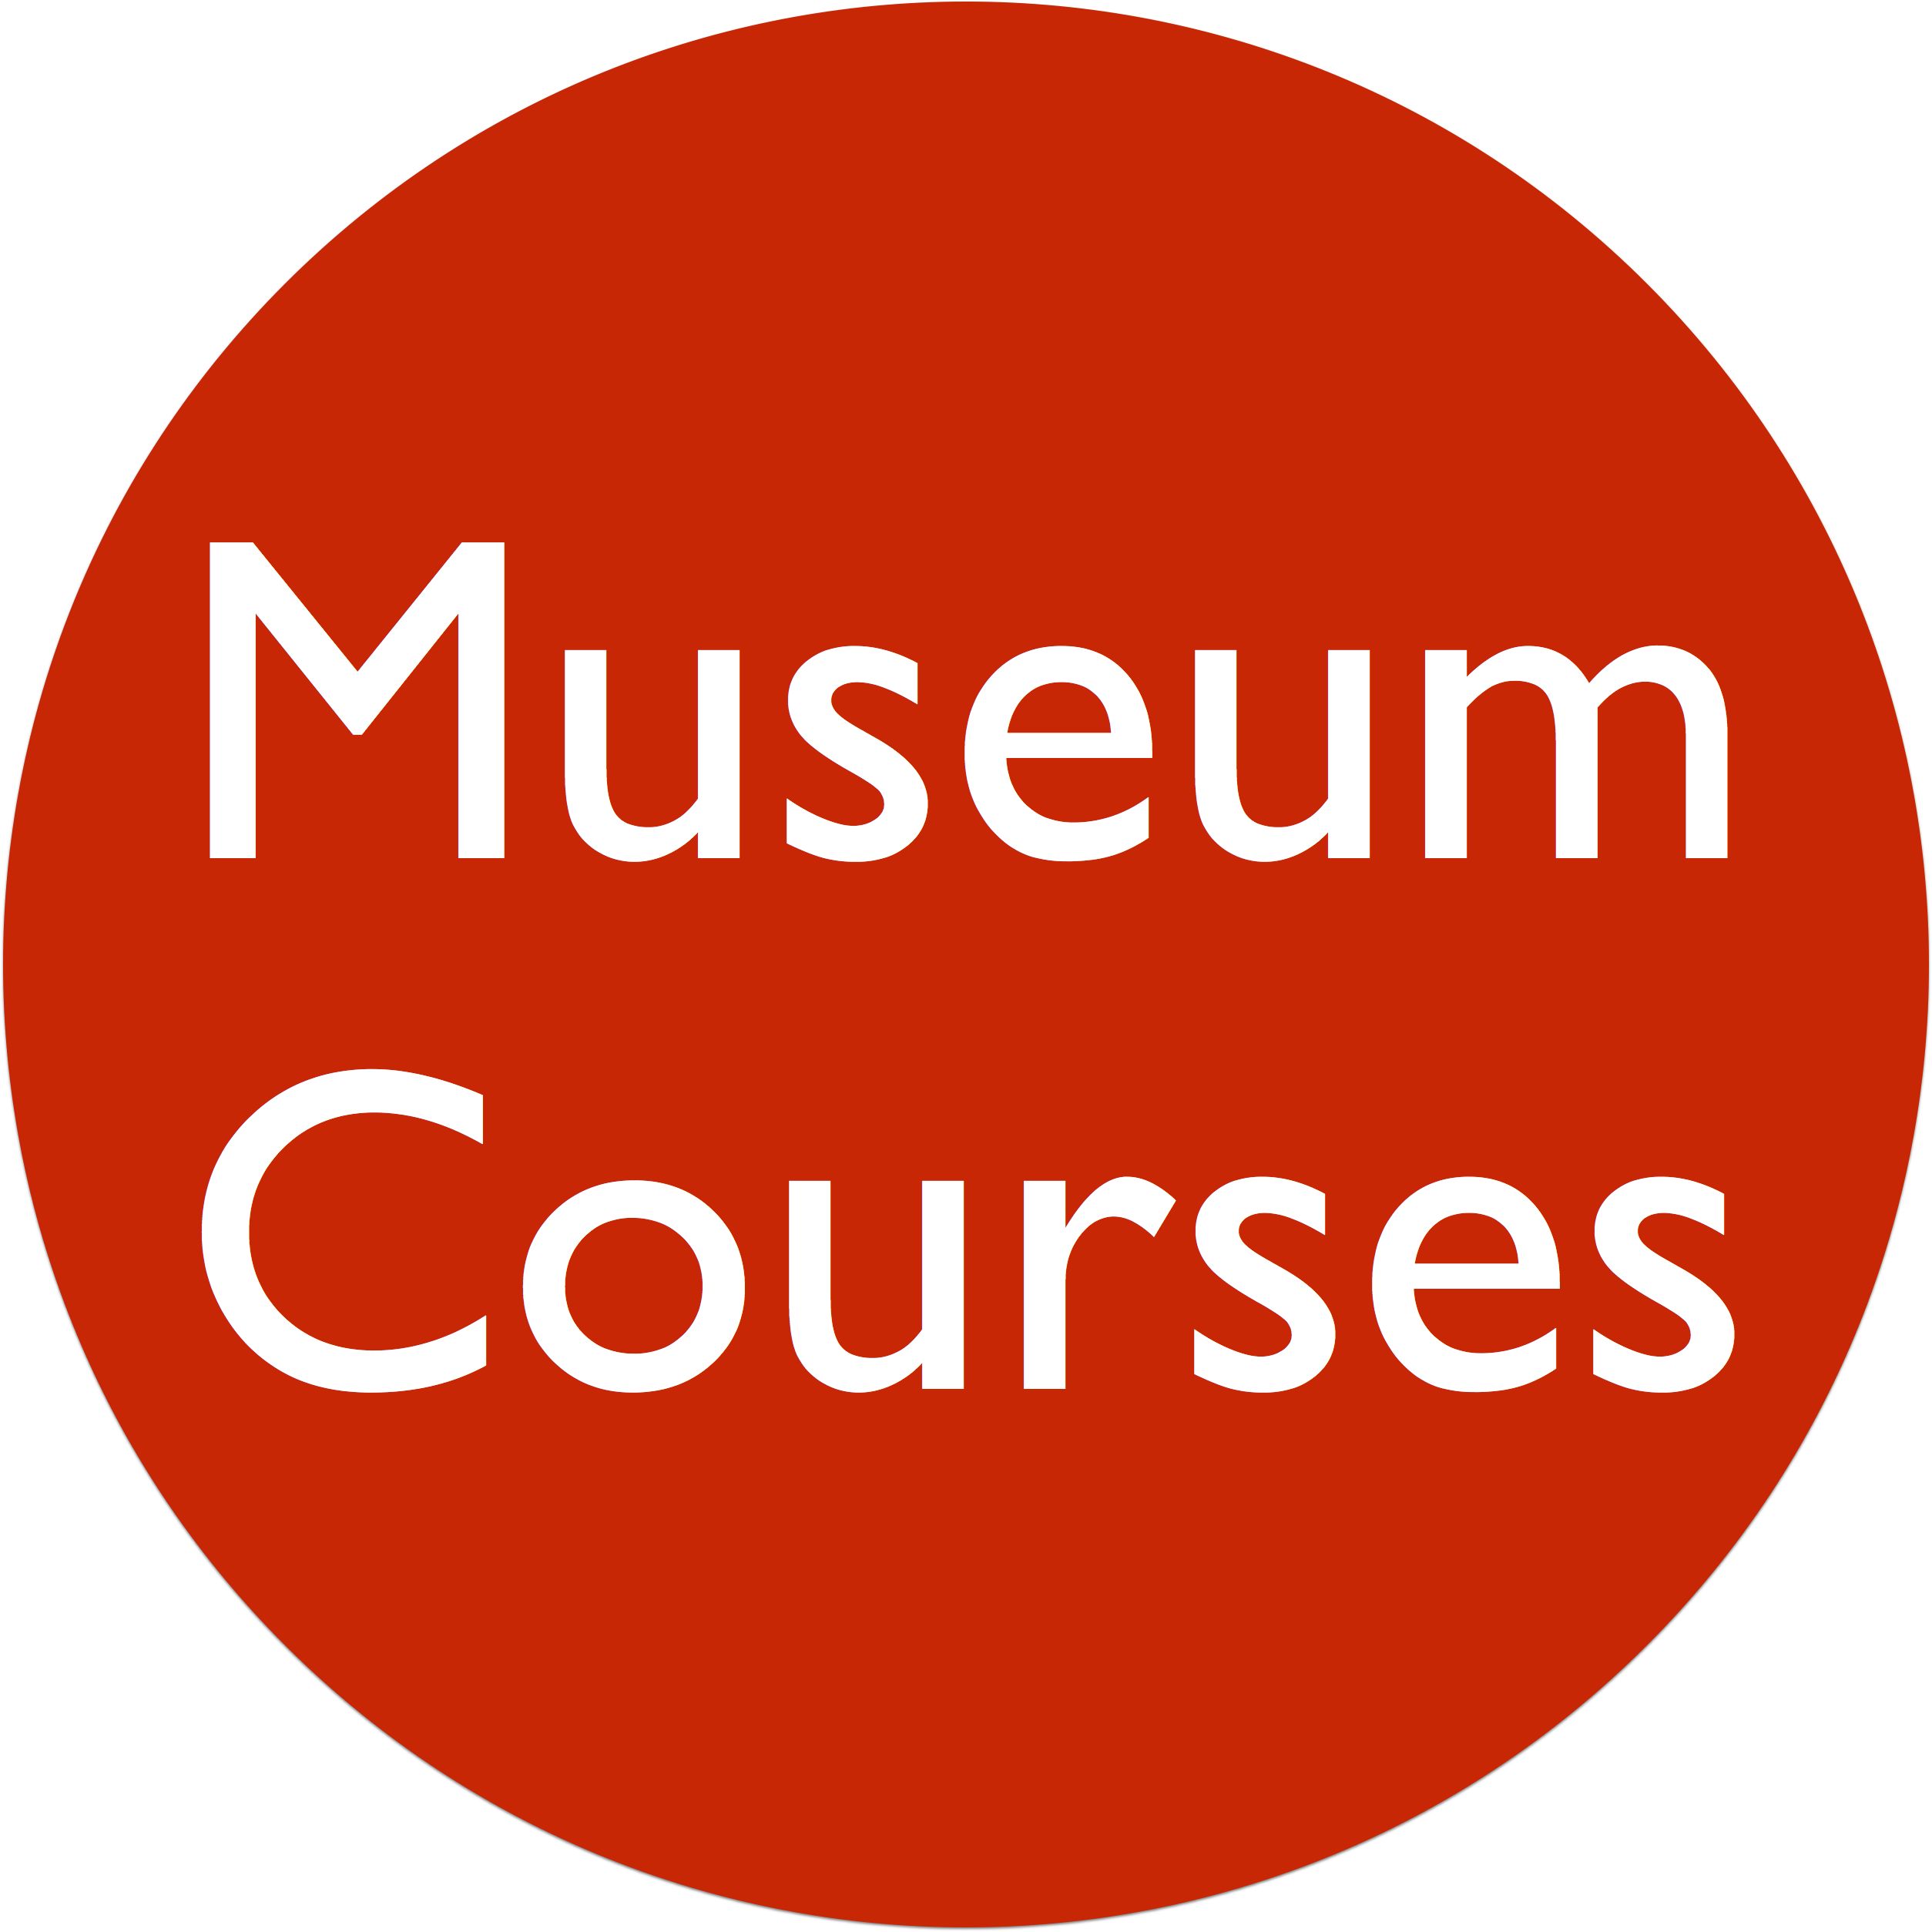 Why I wrote Museums 101